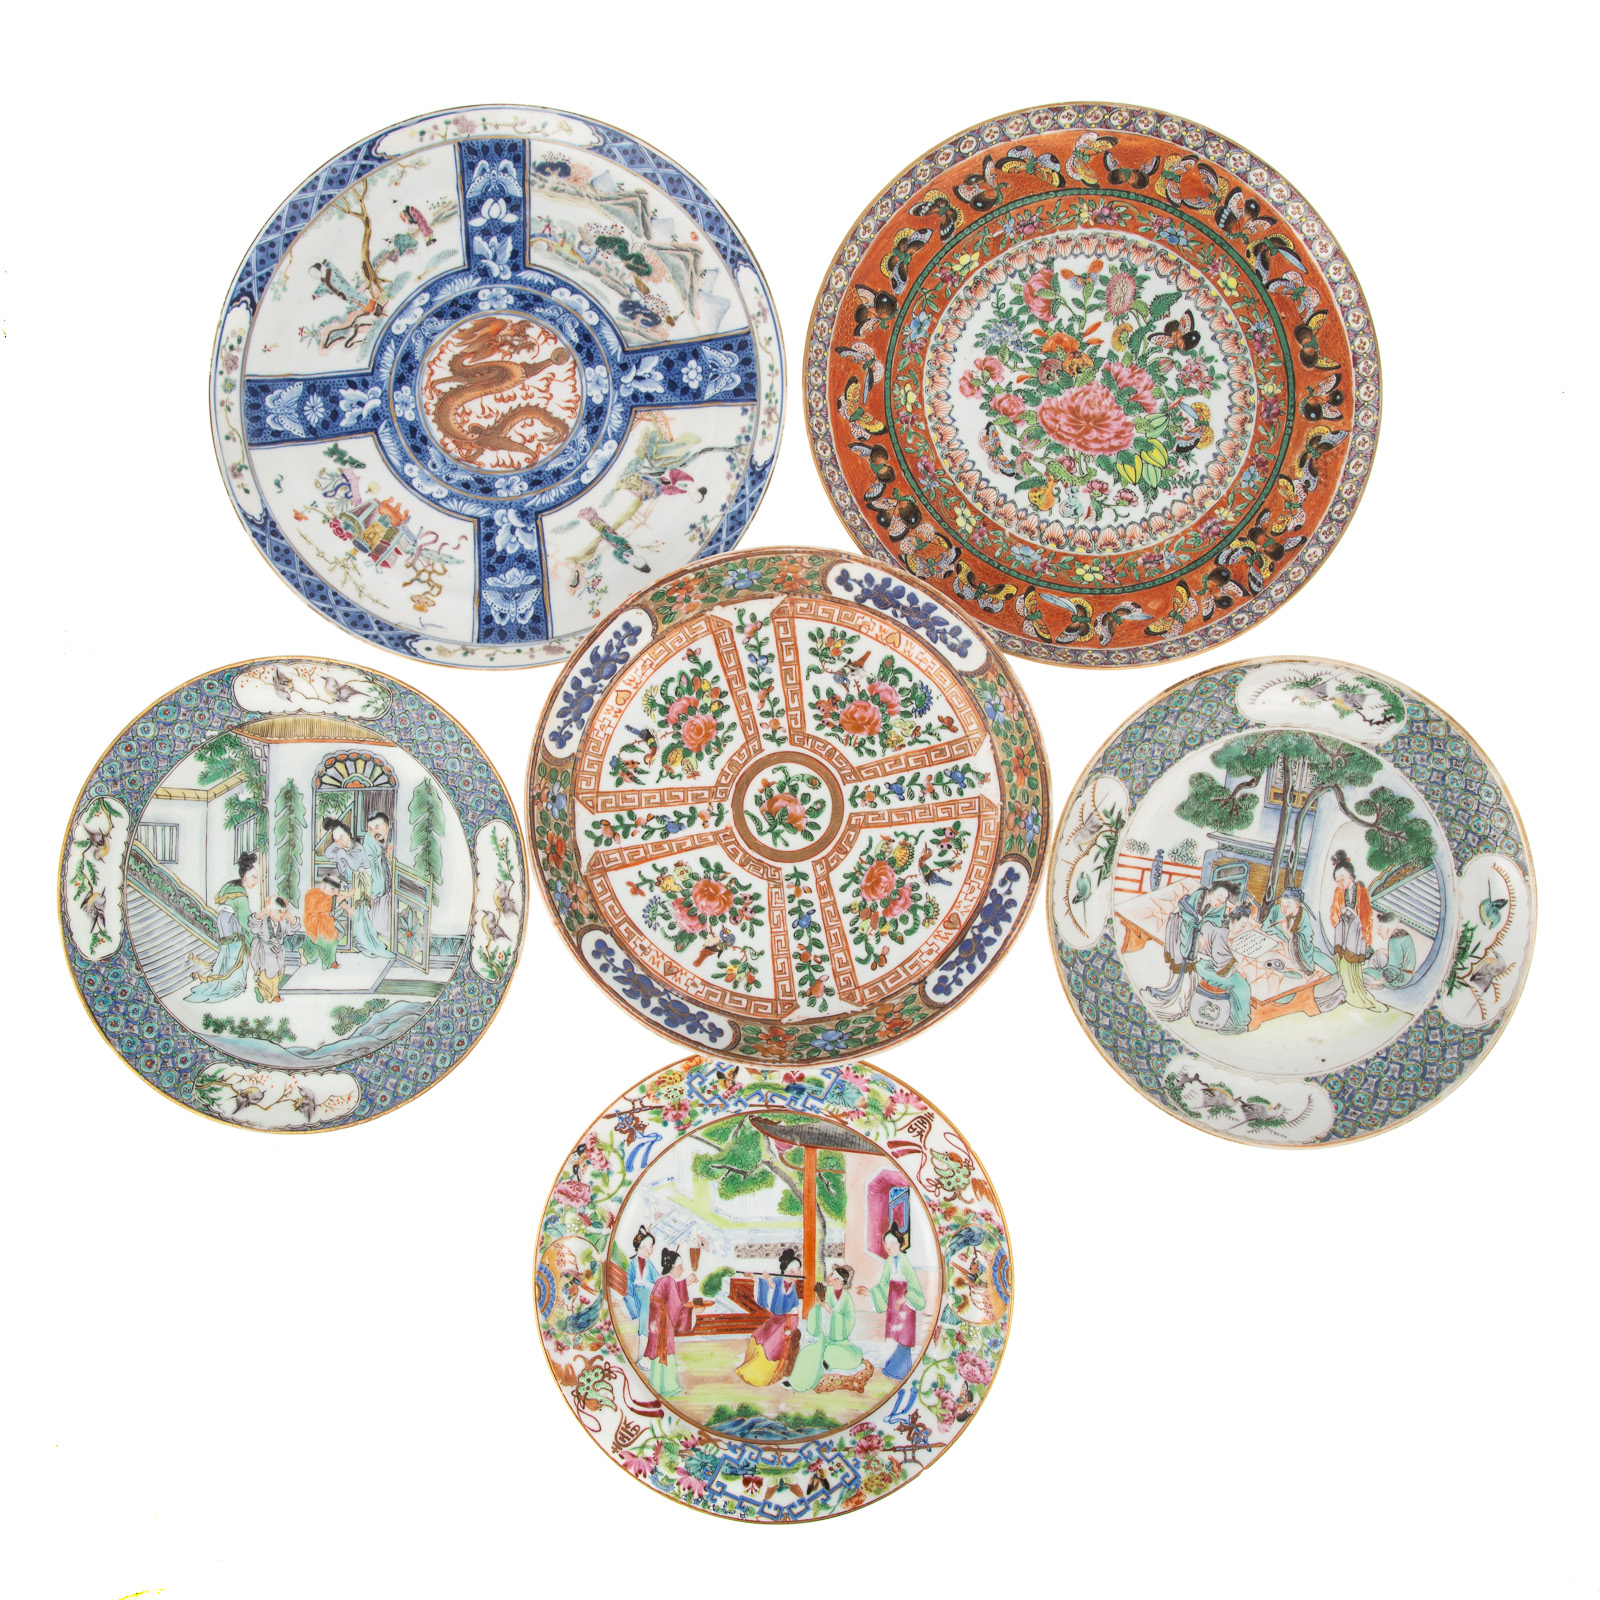 SIX CHINESE EXPORT PLATES Daoguang